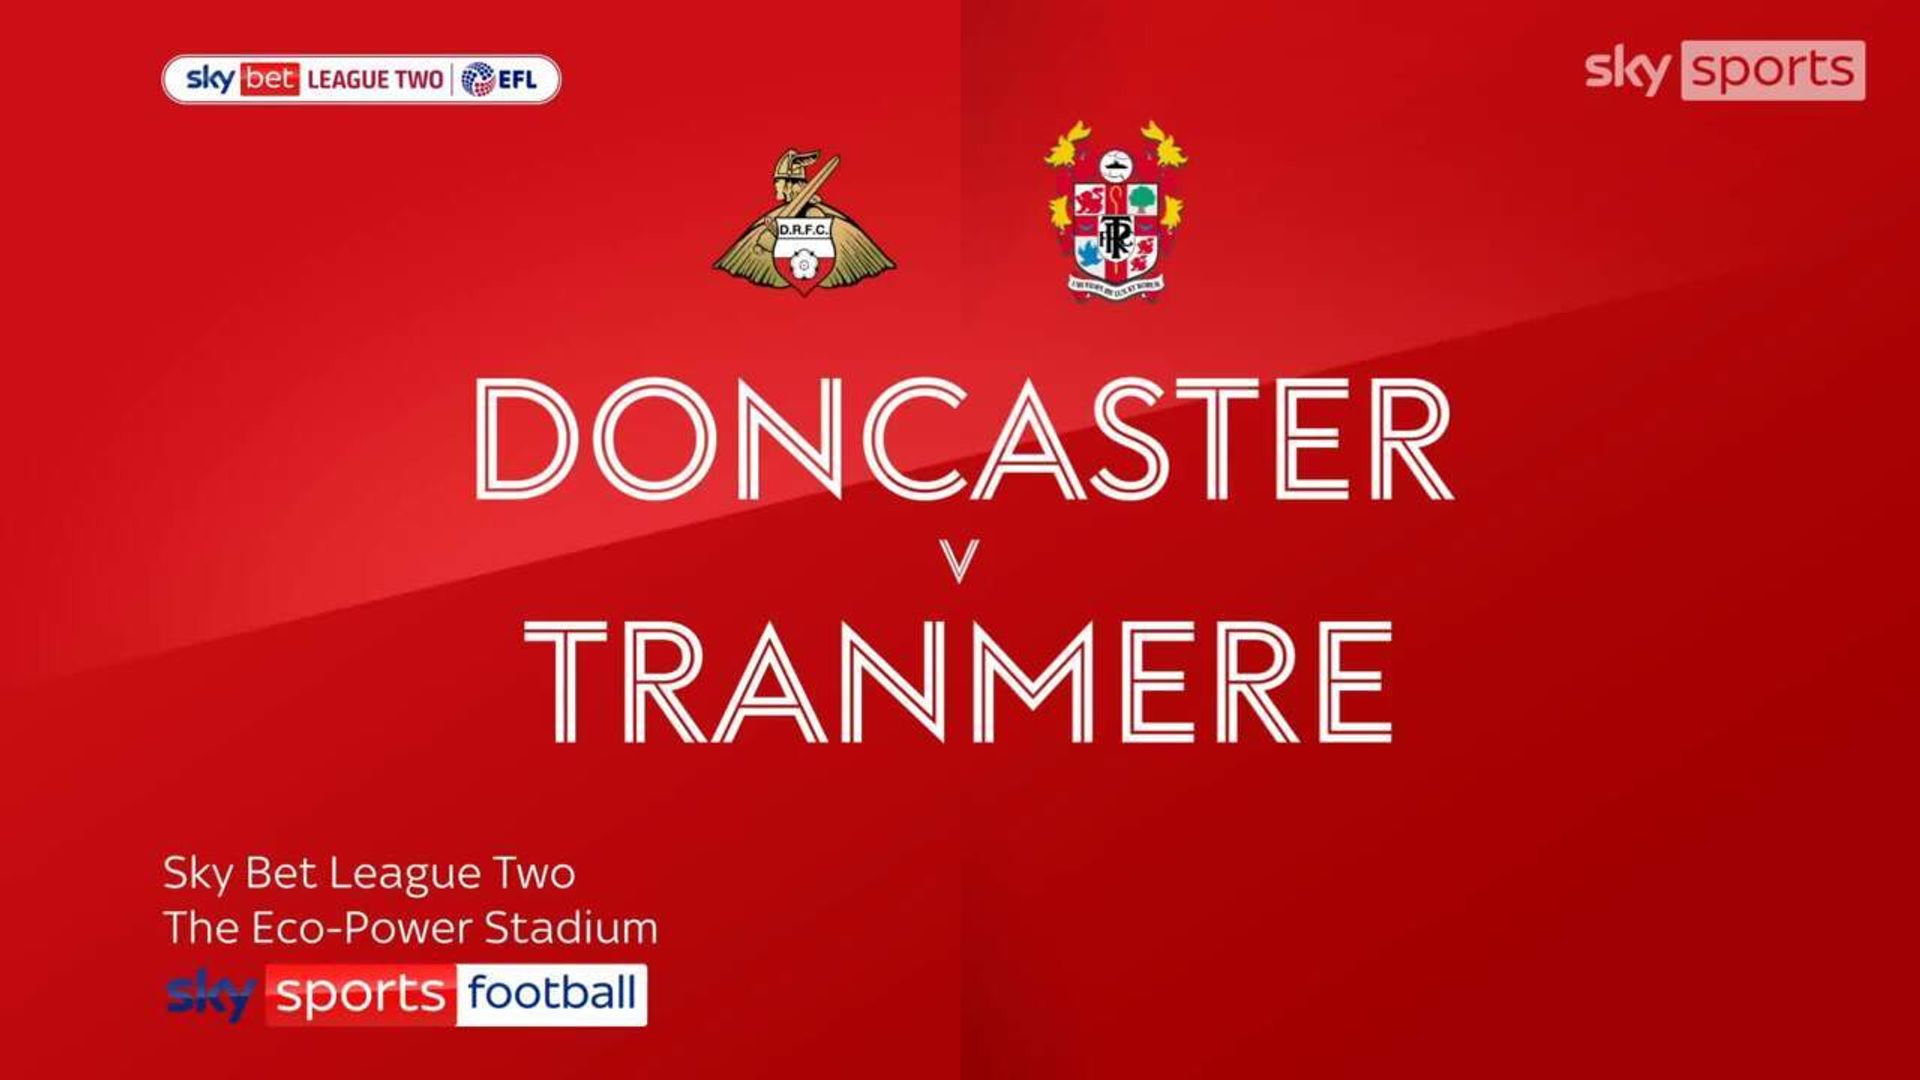 Doncaster 2-1 Tranmere